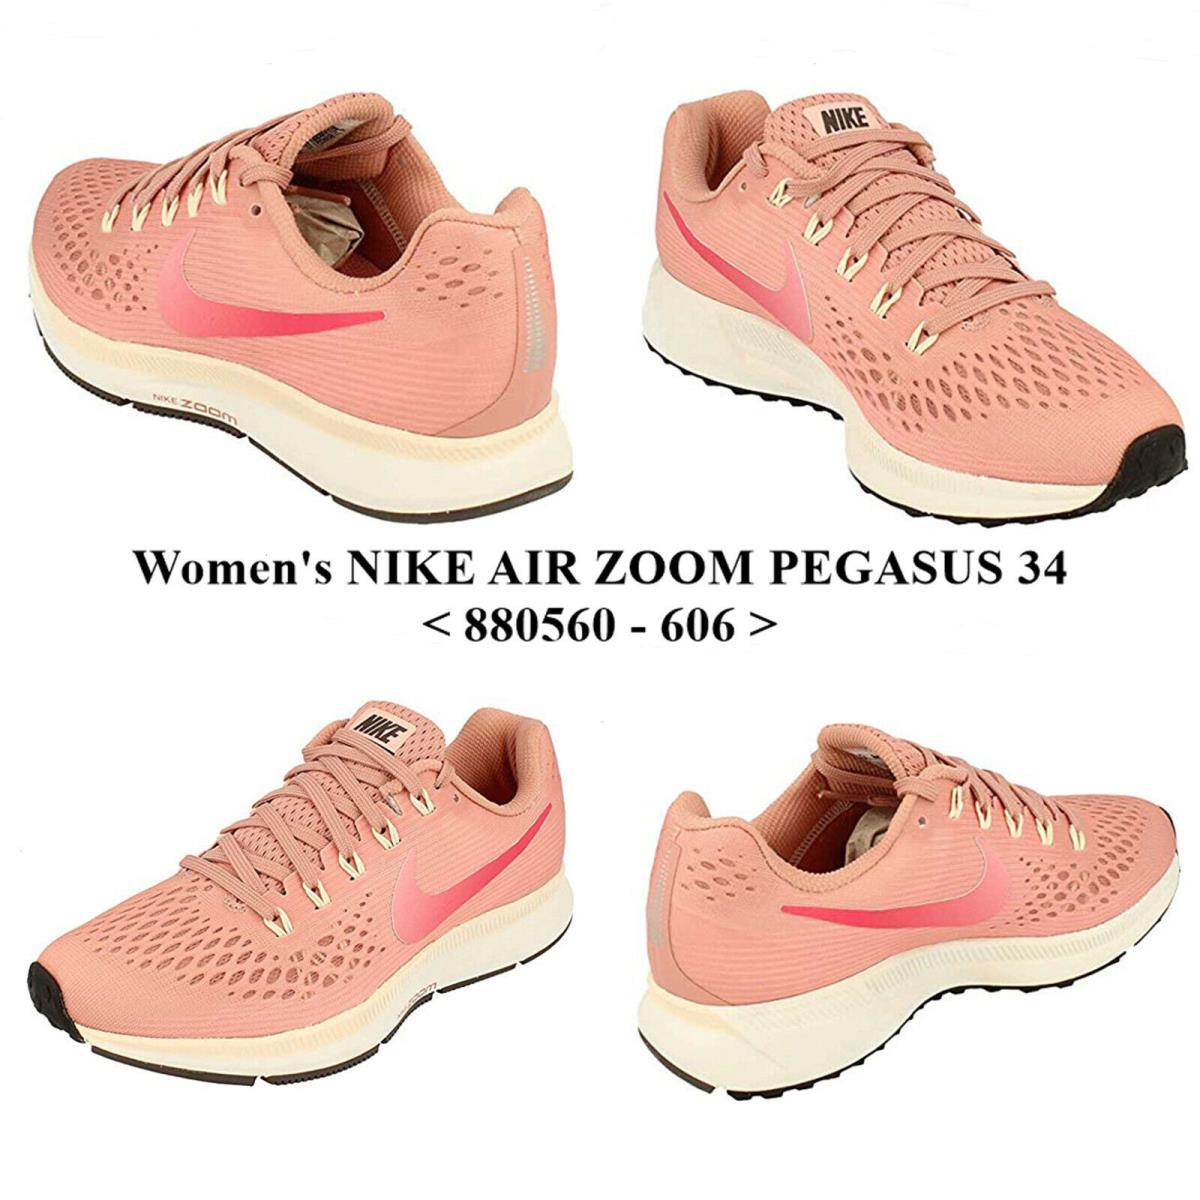 Women`s Nike Air Zoom Pegasus 34 <880560 - 606> Running/casual Shoe.new with Box - RUST PINK / TROPICAL PINK